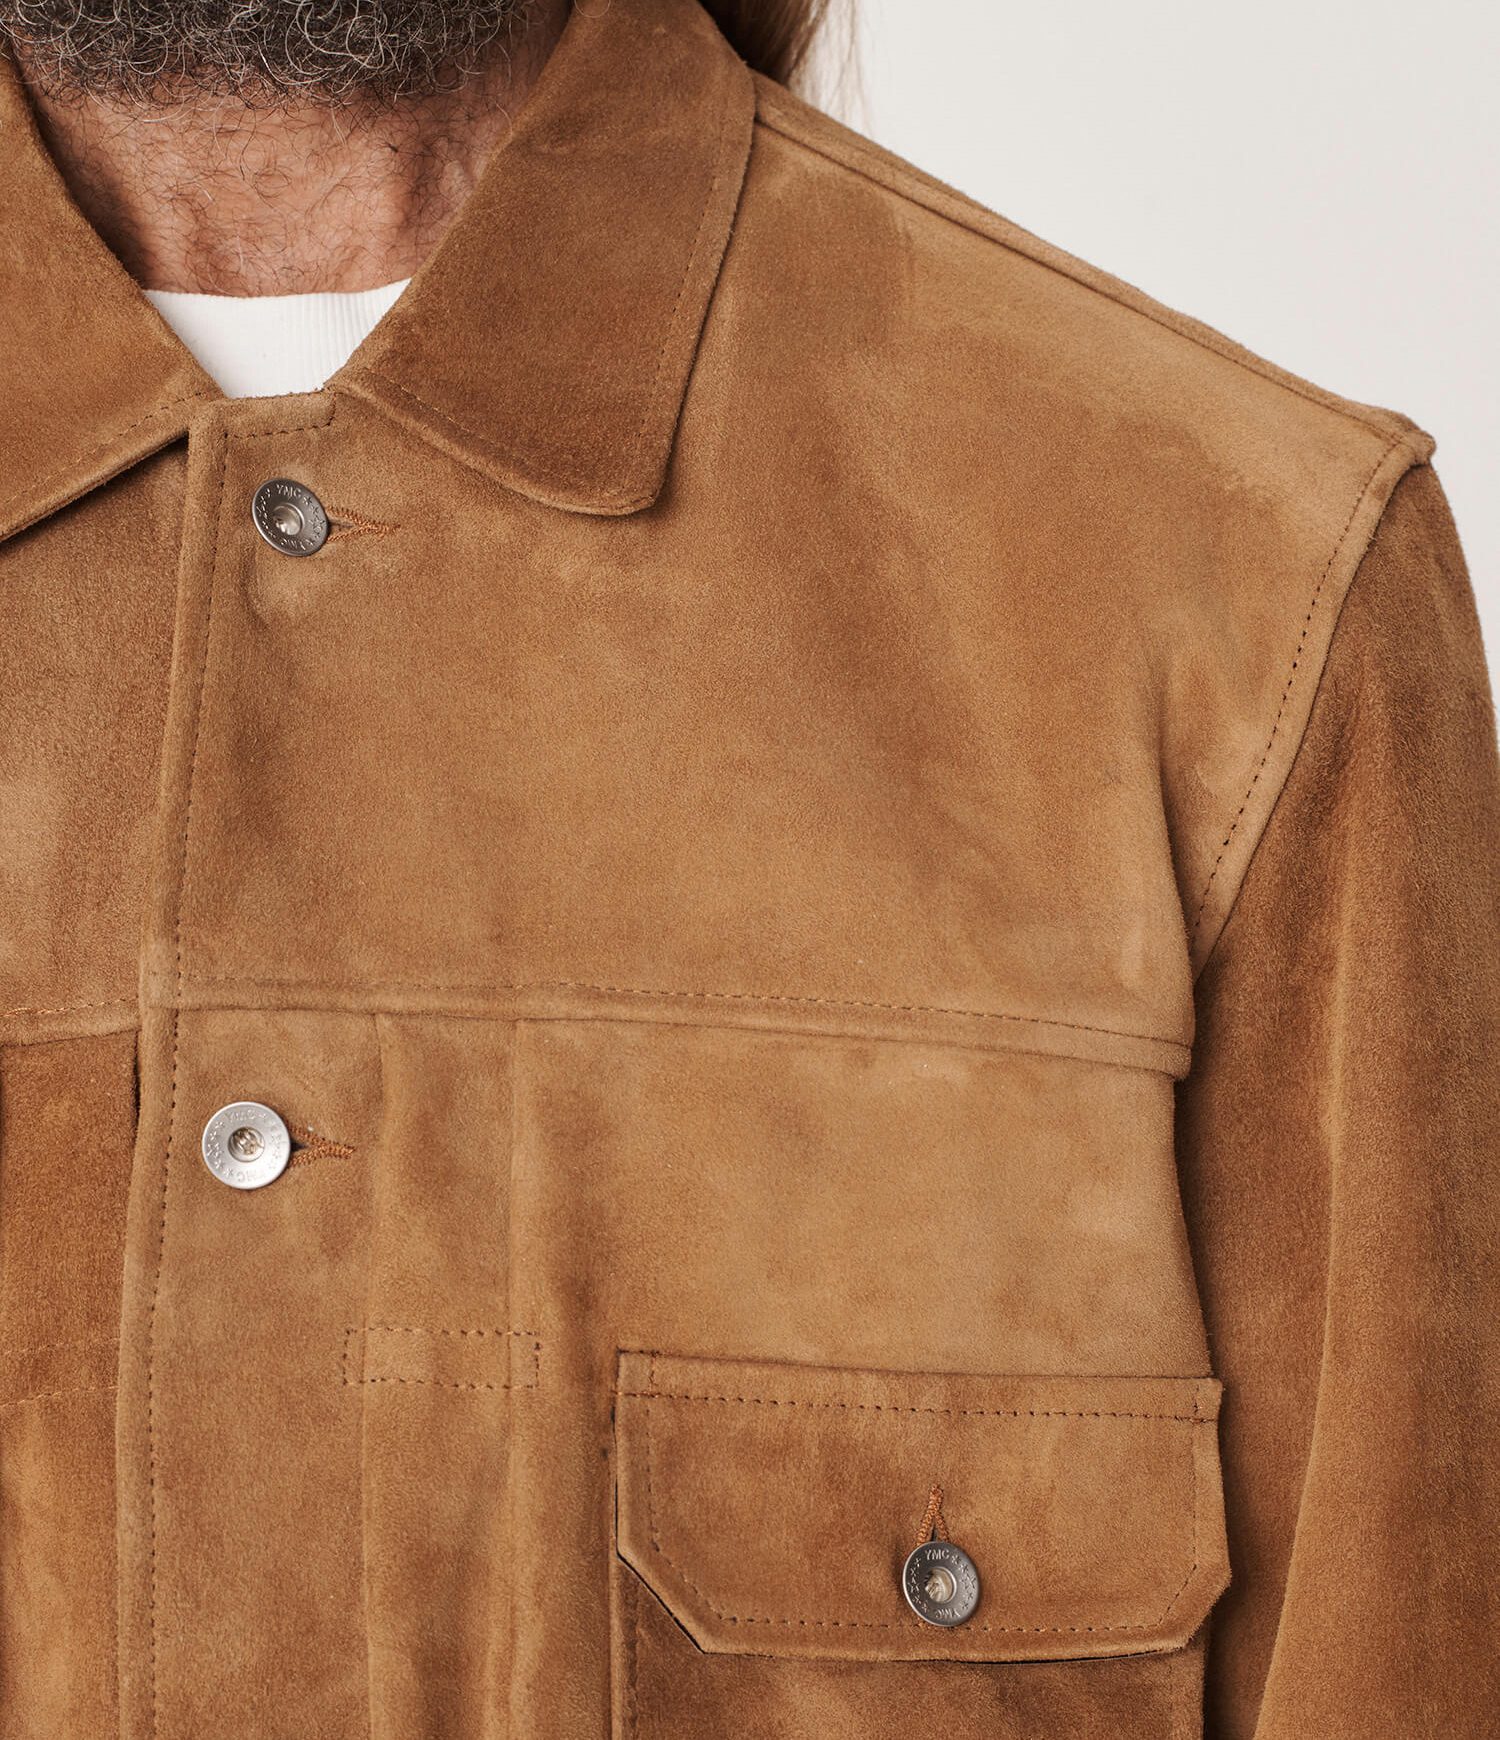 These are the best suede jackets made in Britain